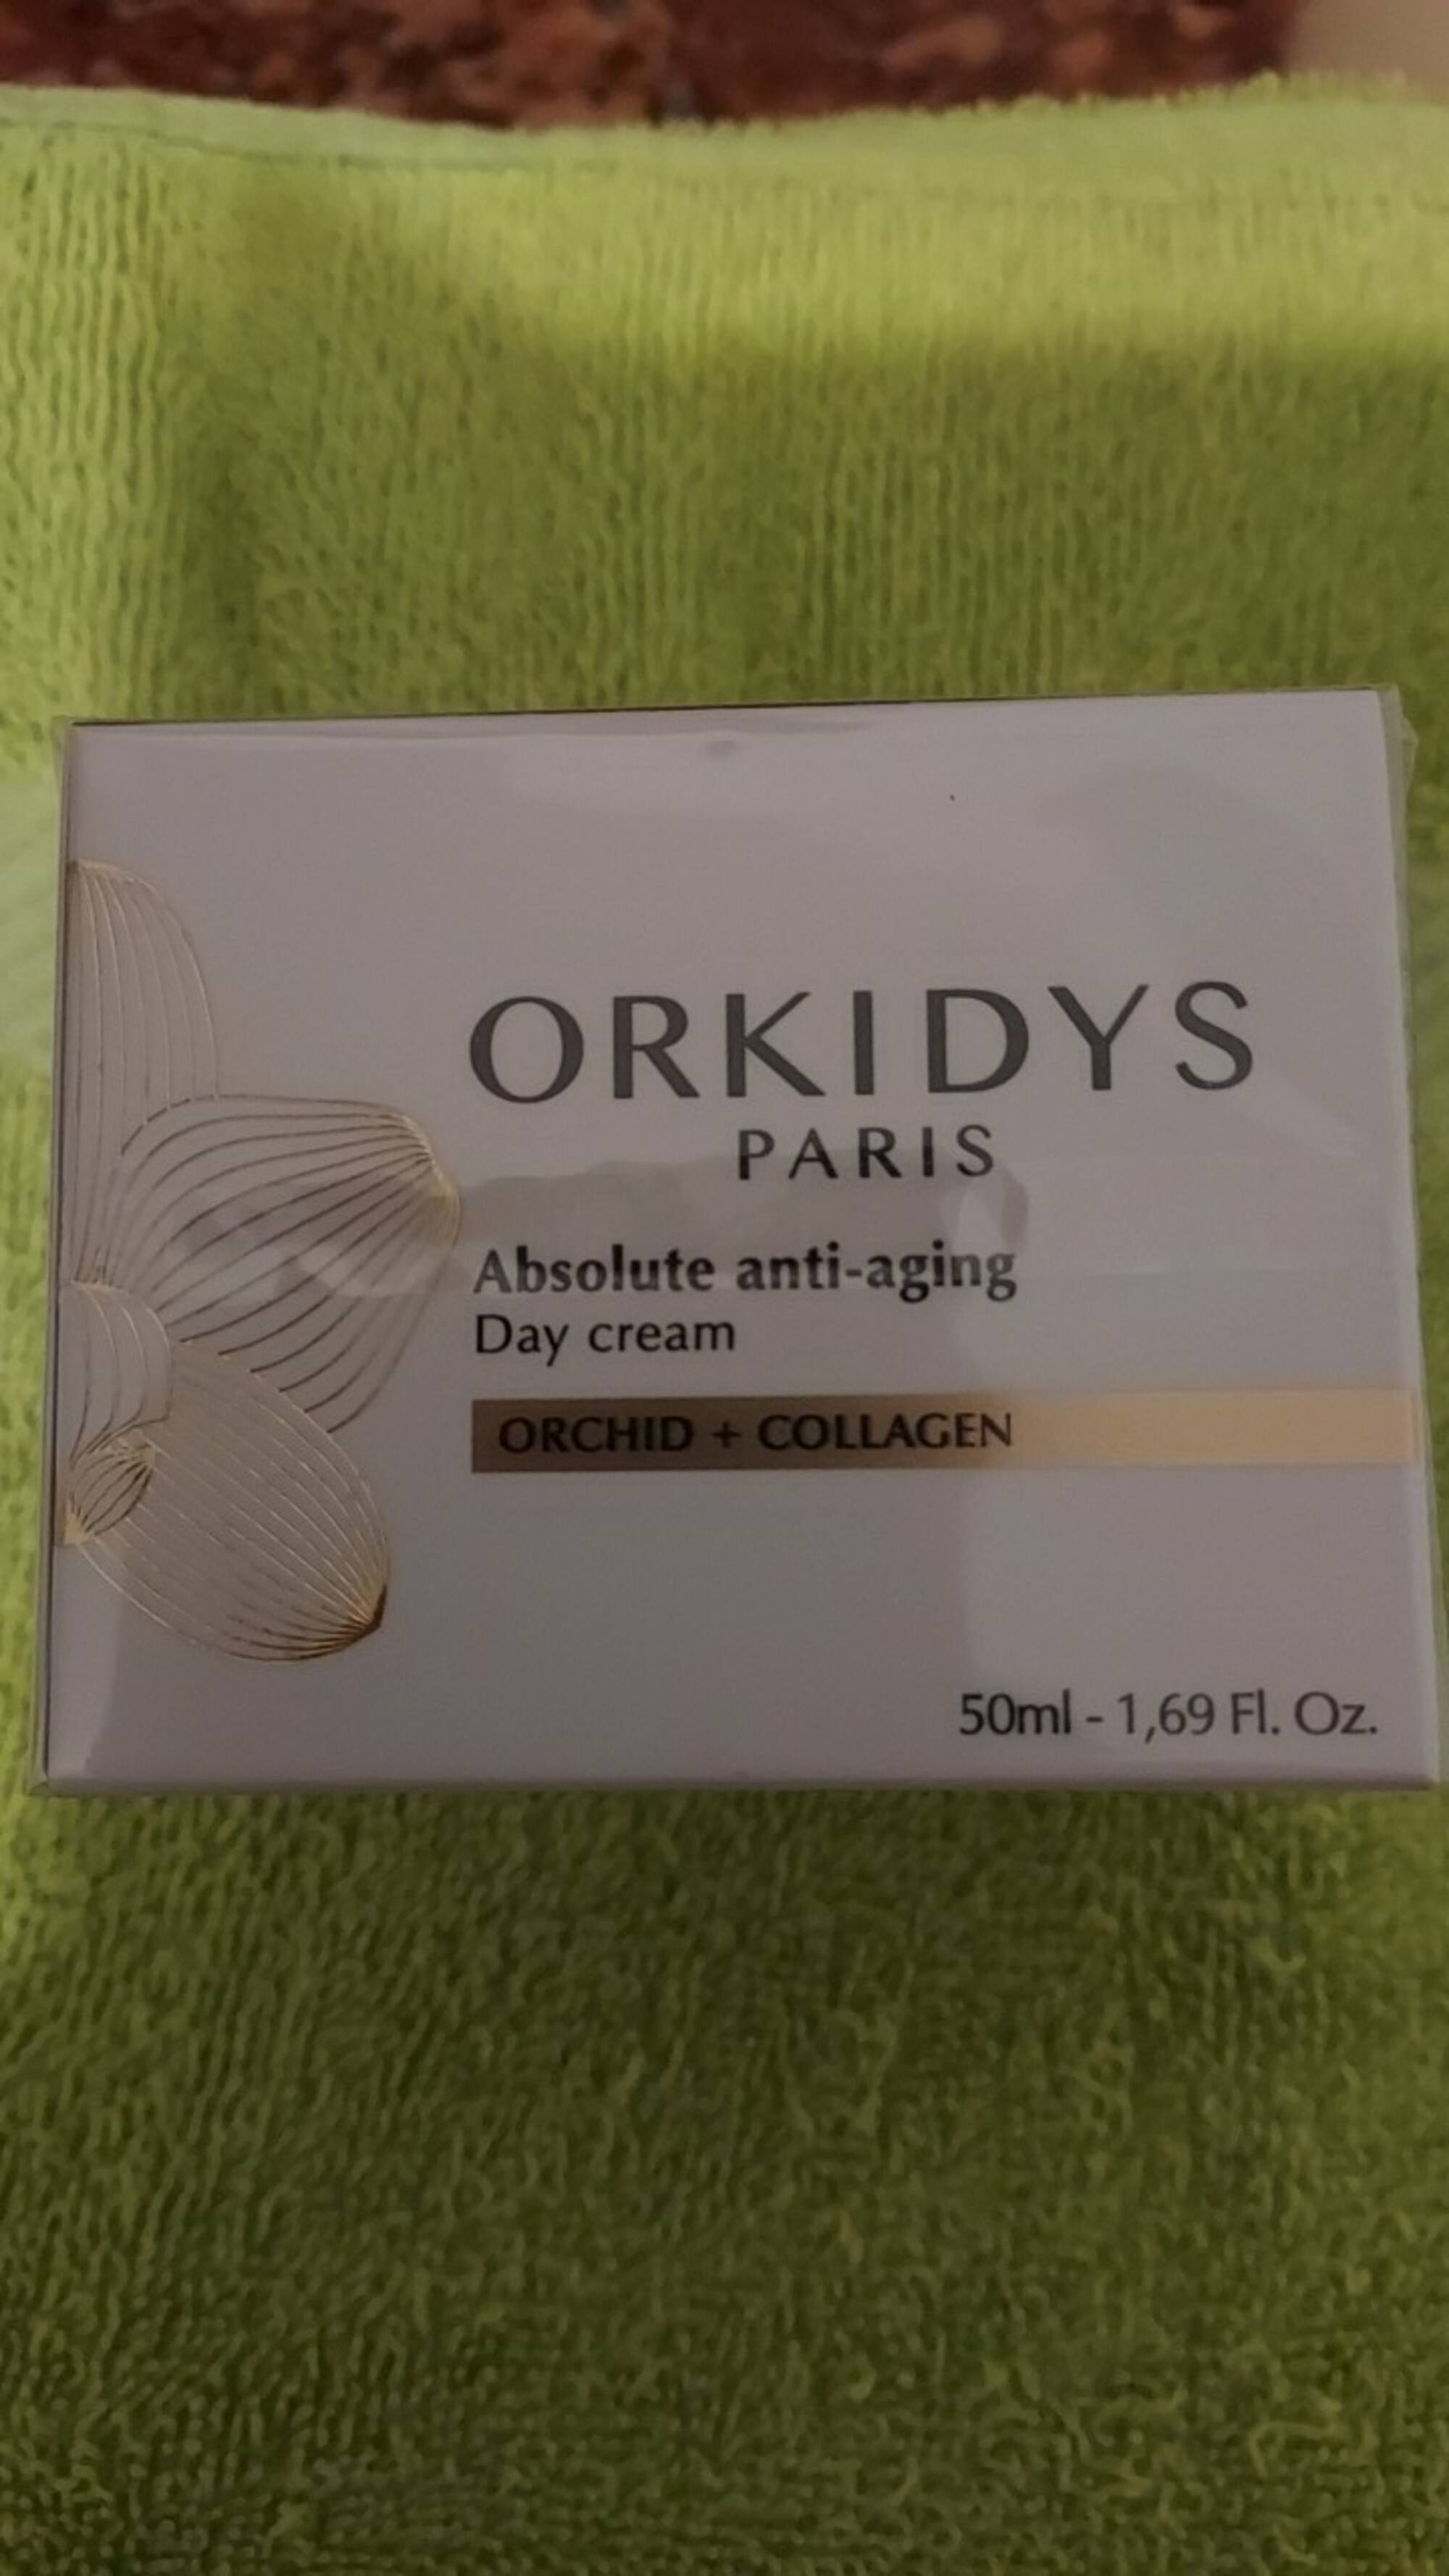 ORKIDYS - Absolute anti-aging - Day cream